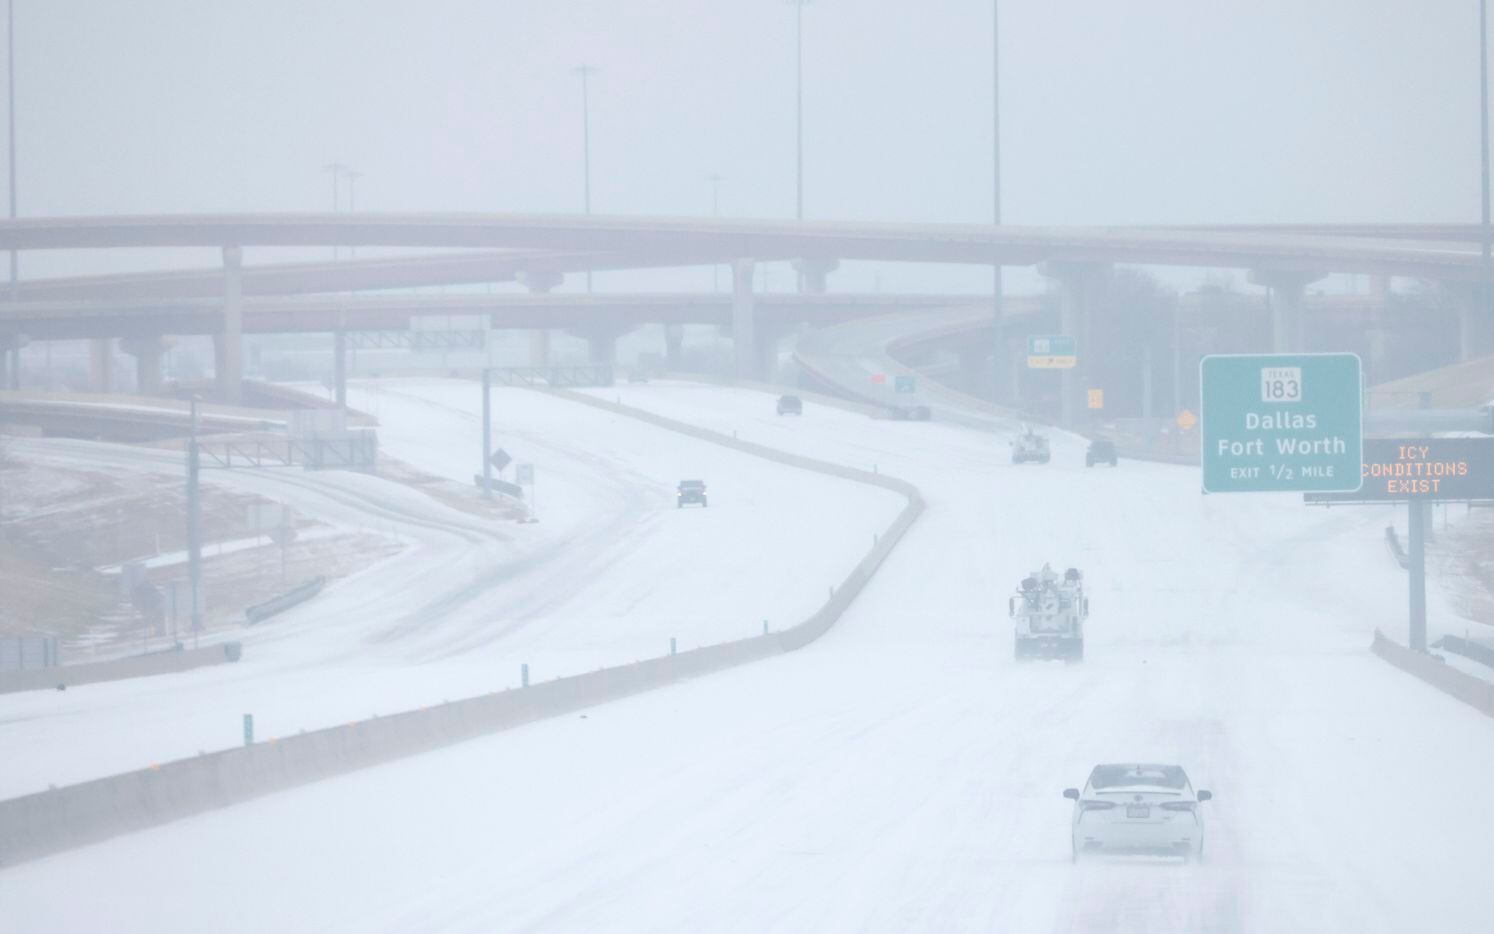 Thick amounts of sleet covered Northbound 161 Bush Turnpike between Interstate 30 and SH 183...